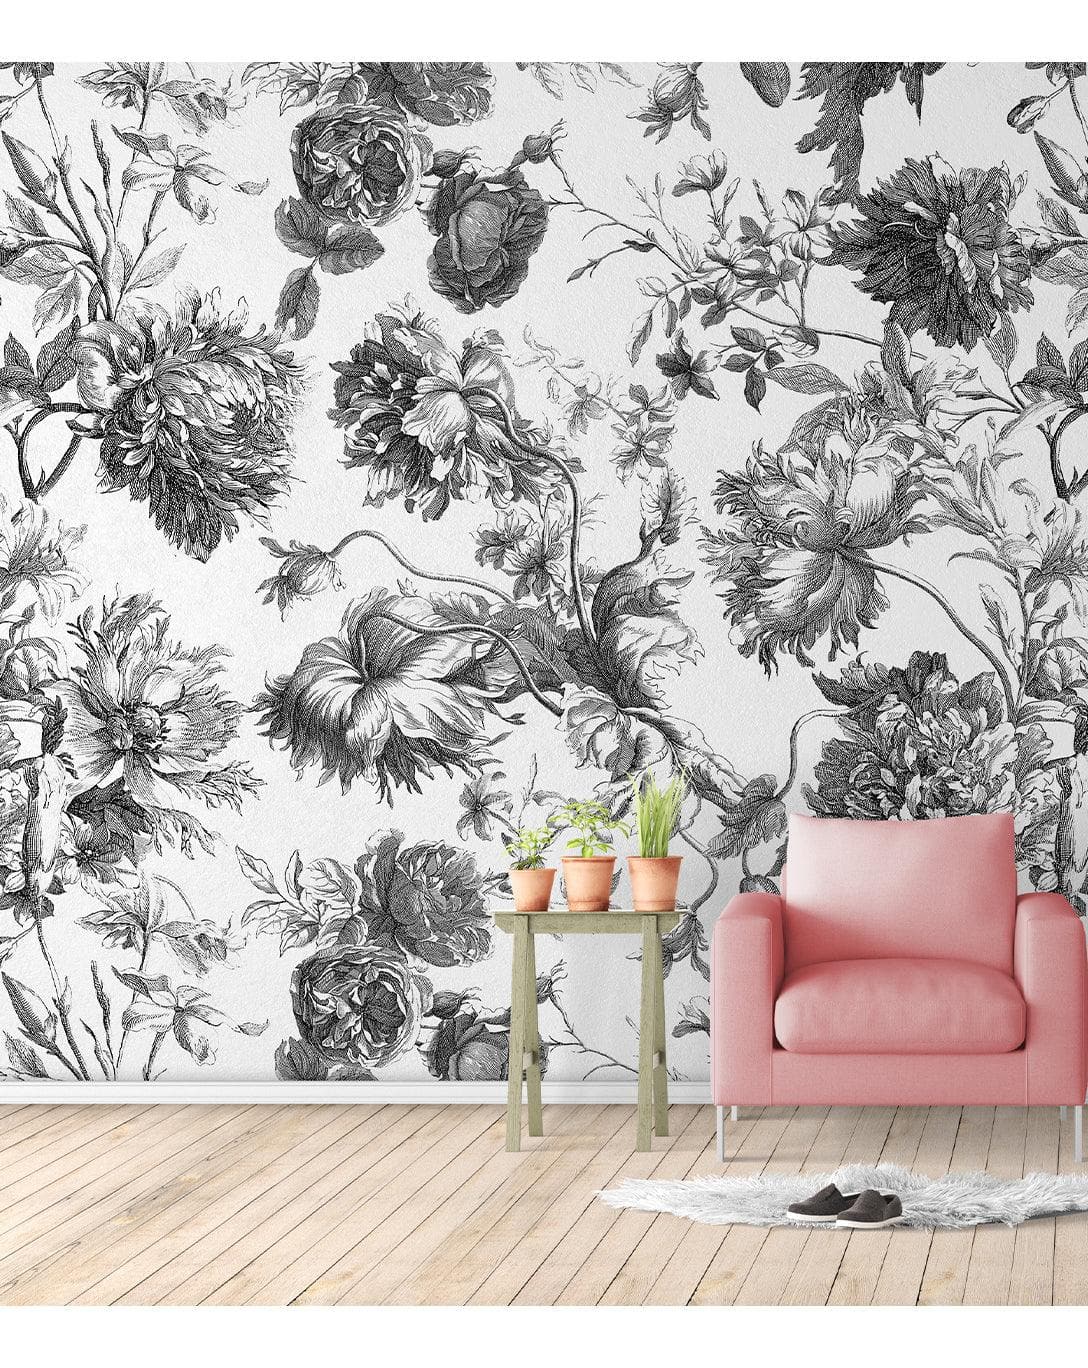 French Toile Pink Flower Provence Vintage Romantic Wallpaper French Toile Black and White Flower Provence Vintage Wall Mural French Toile Black and White Flower Provence Vintage Wall Mural 